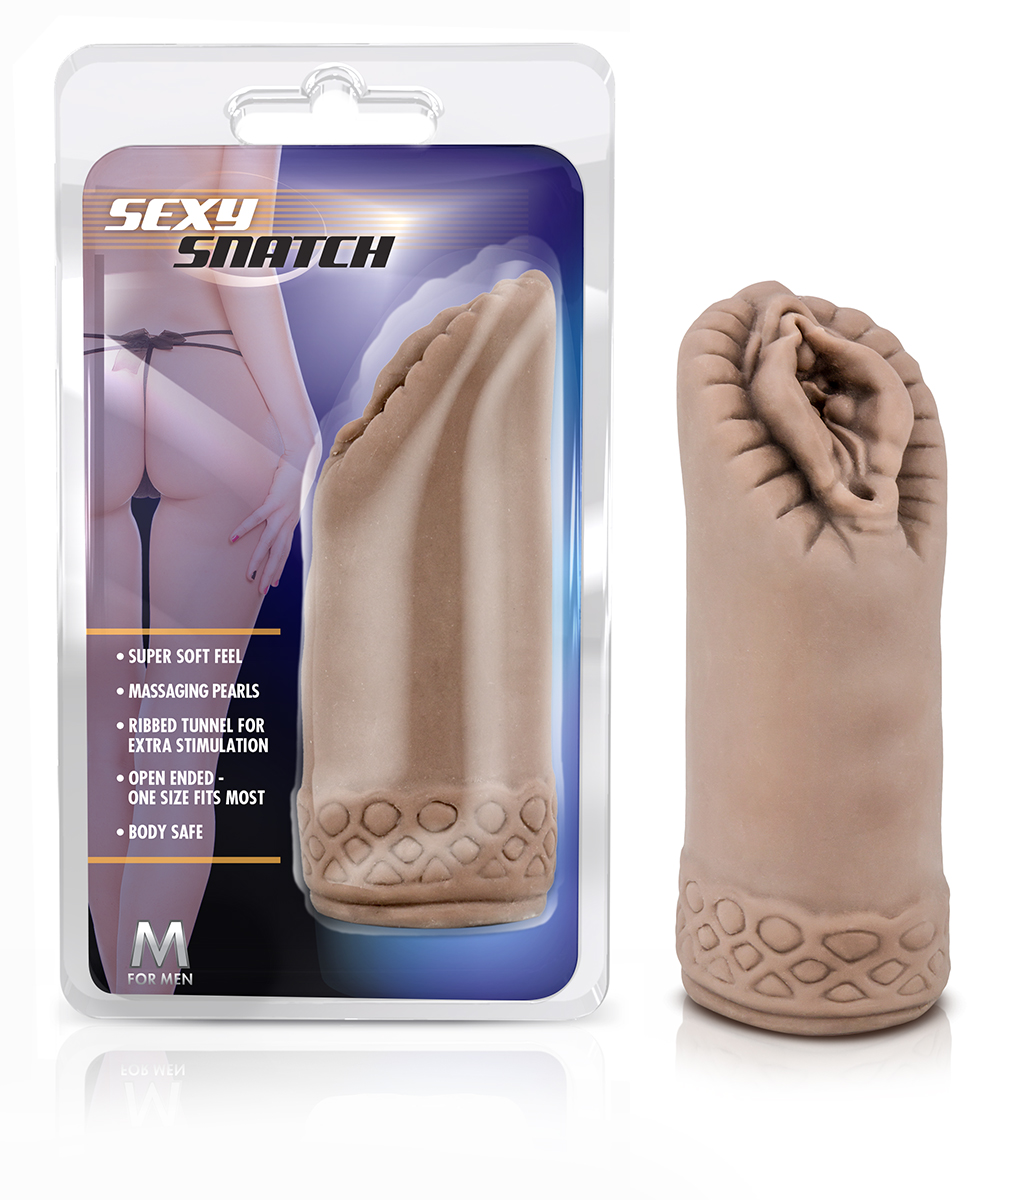 M for Men - Sexy Snatch - Brown